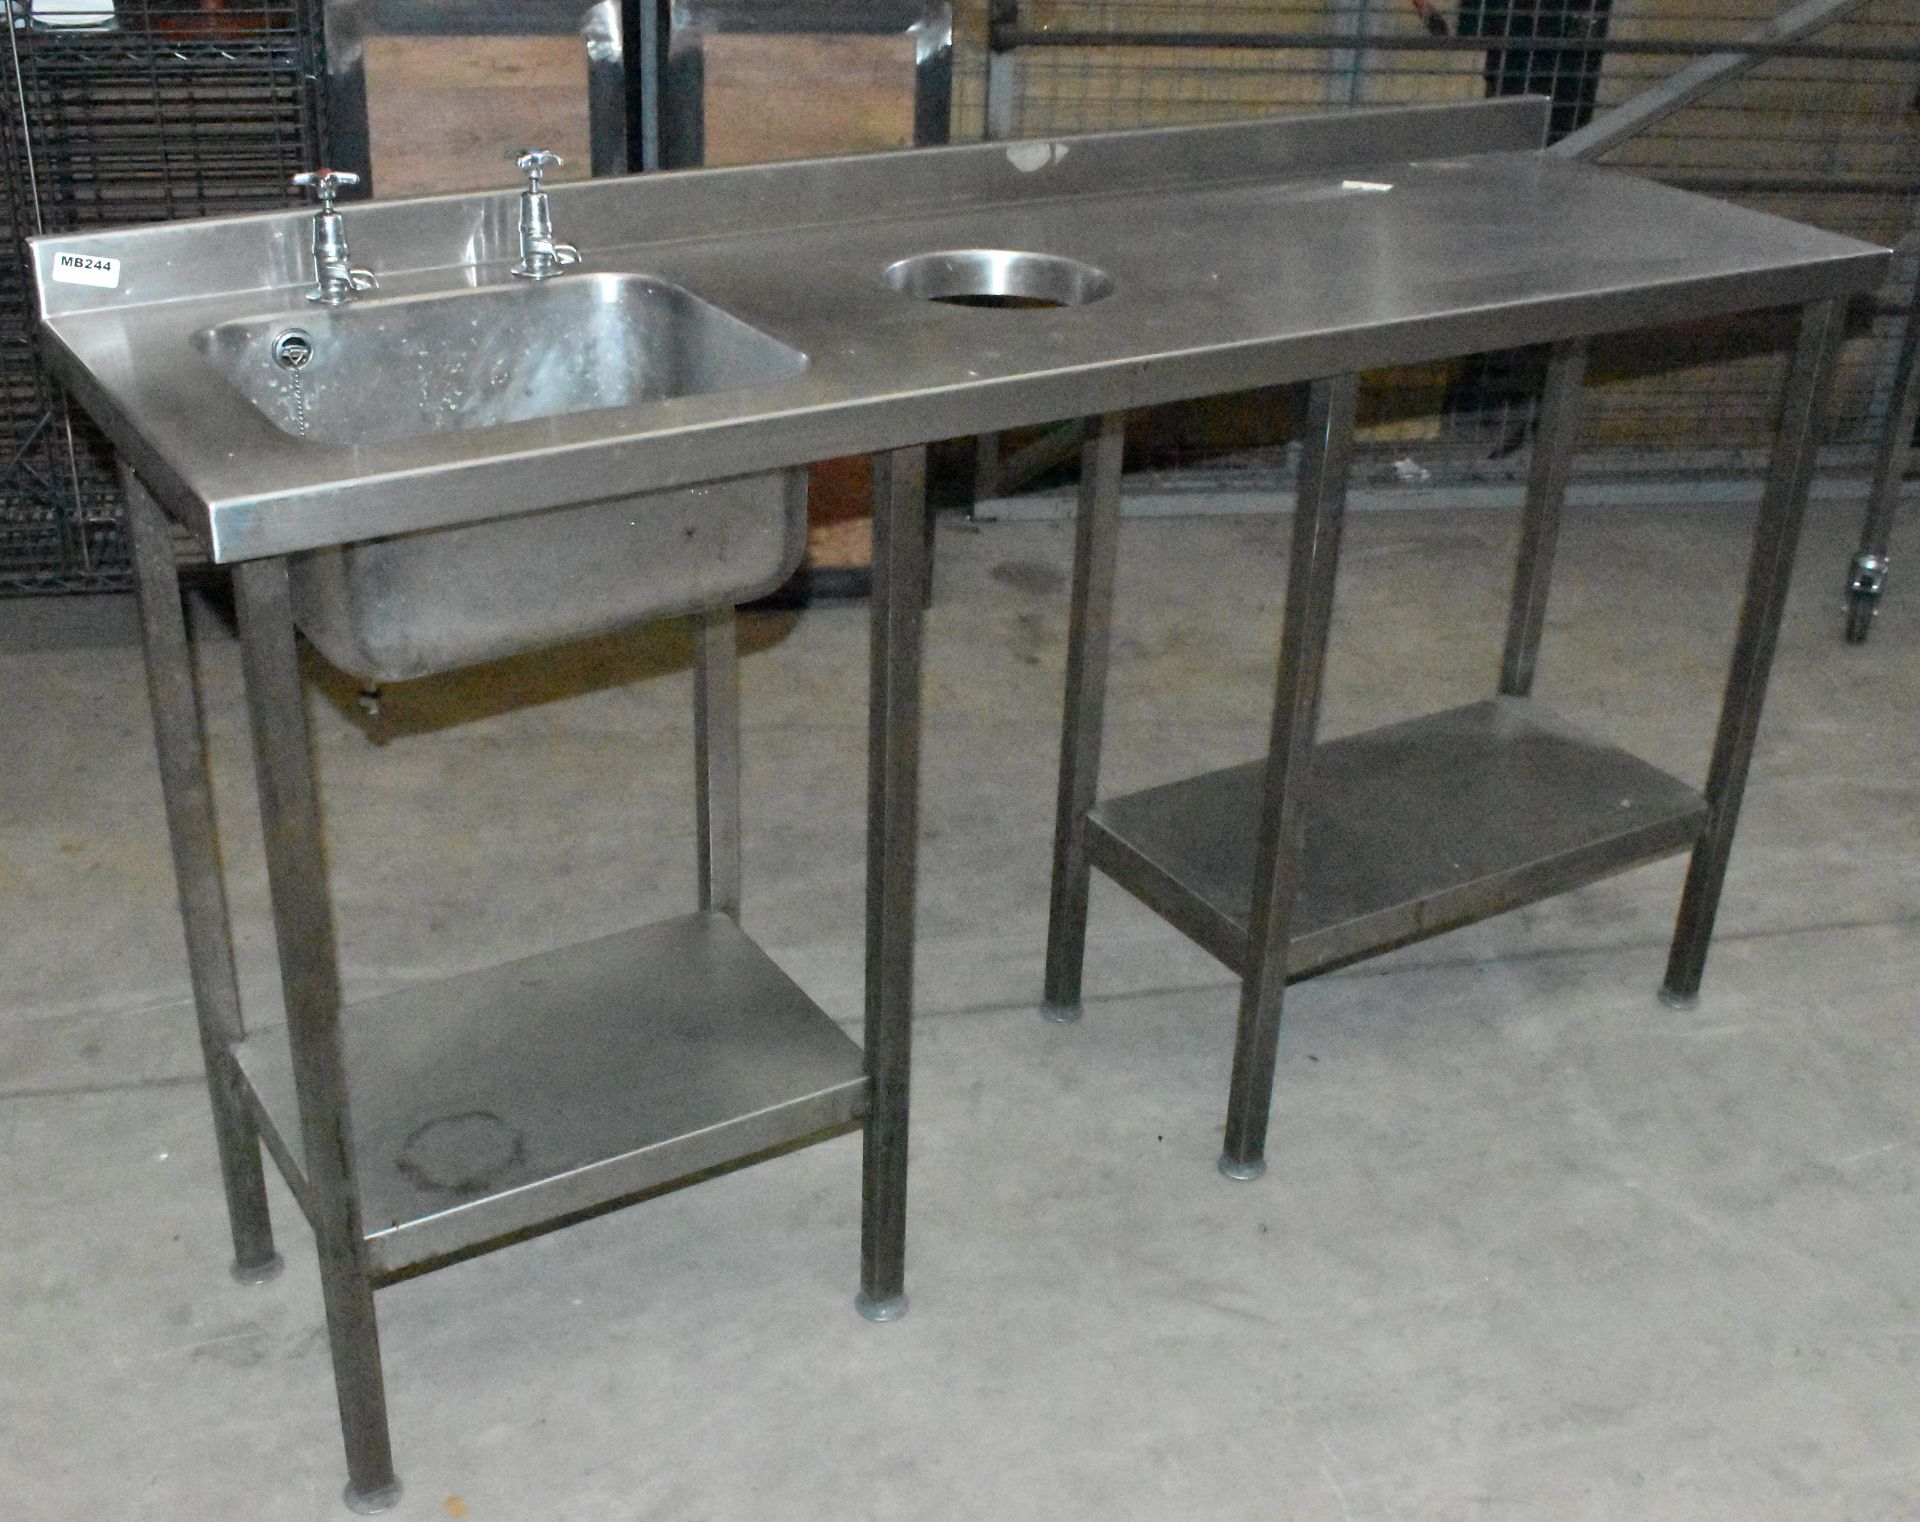 1 x Stainless Steel Wash Basin Prep Table With Undershelves, Upstand, Basin and Taps and Waste Chute